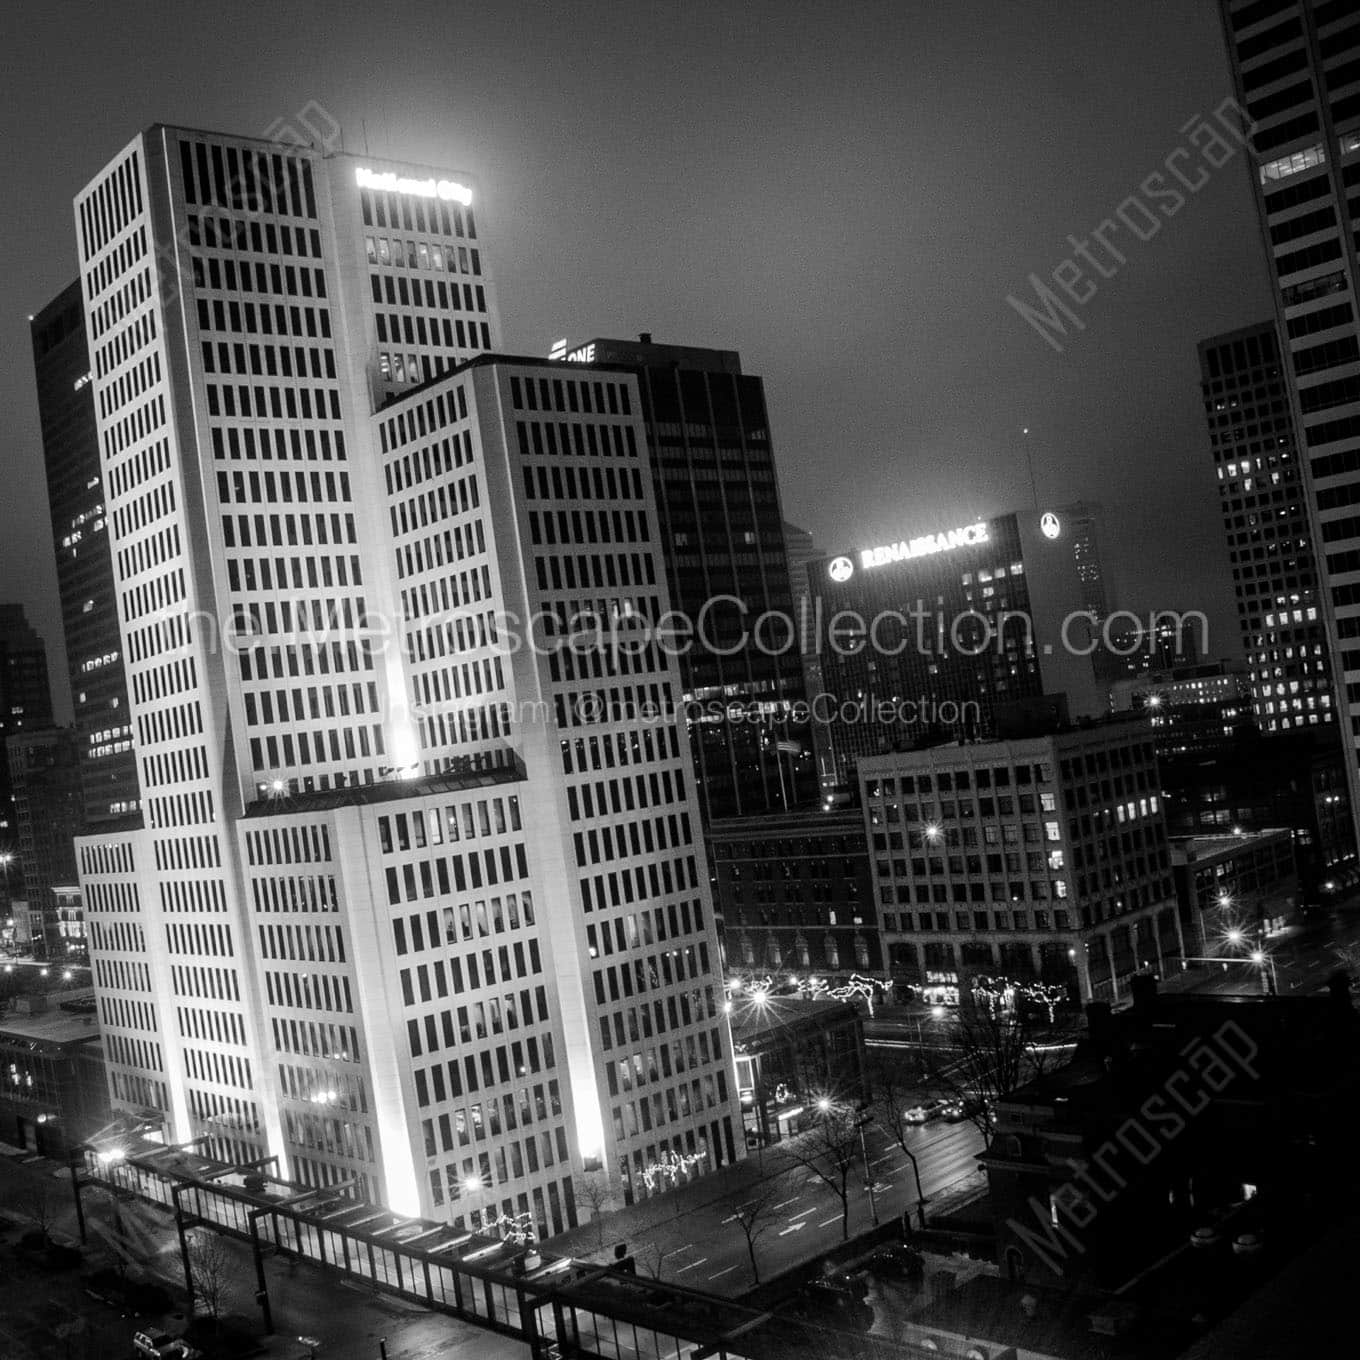 national city bank building at night Black & White Office Art